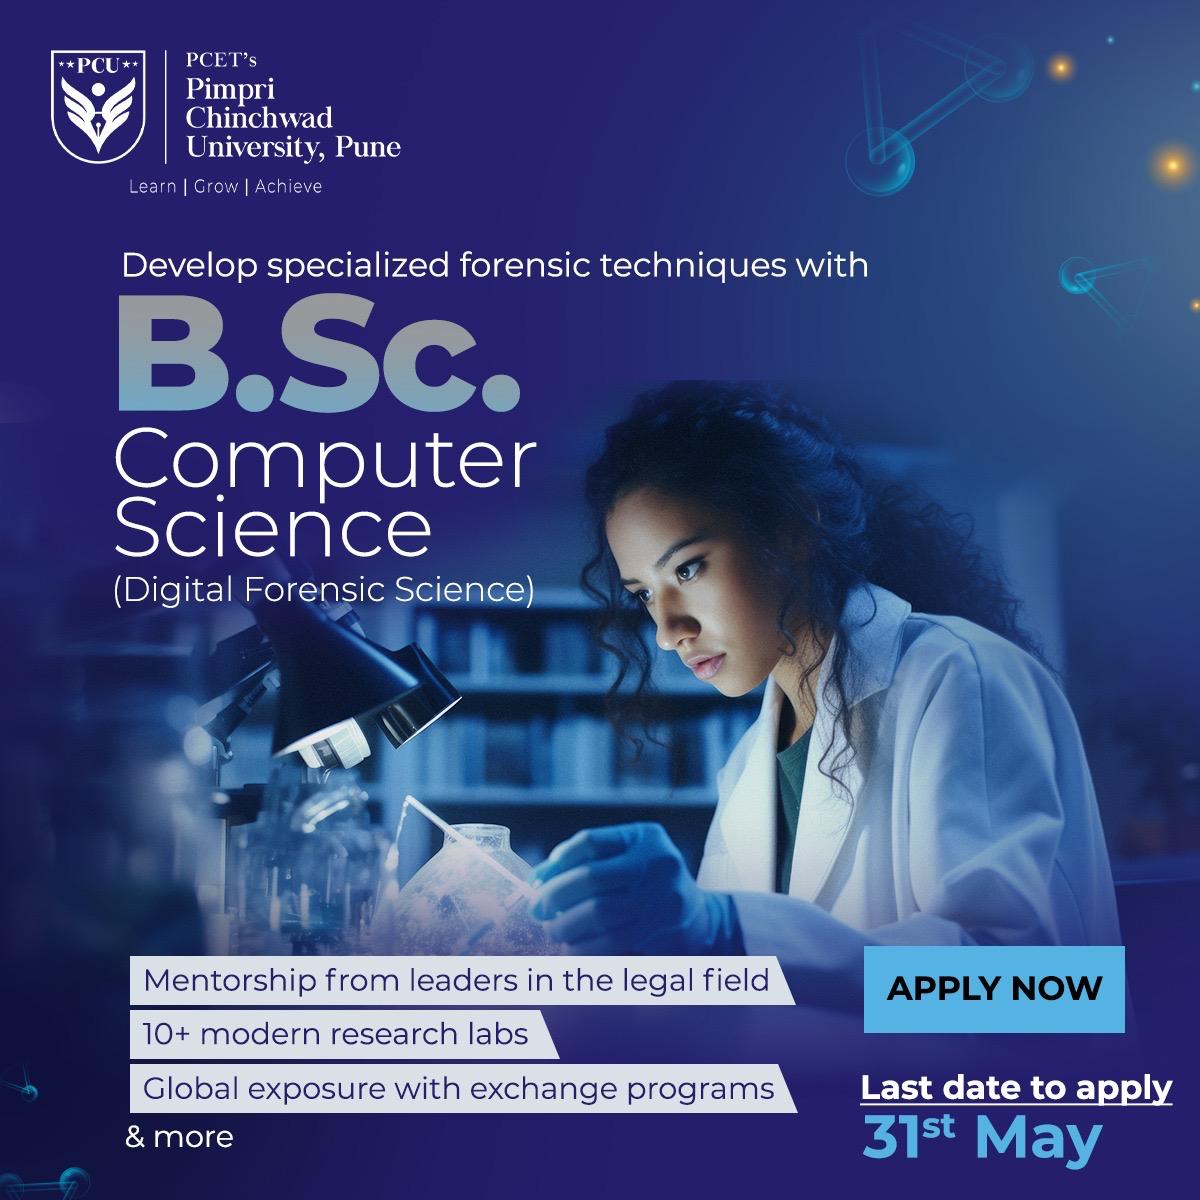 🔍 Master Digital Forensics with a B.Sc. in Computer Science

🌍Gain mentorship from top legal experts, access to 10+ advanced research labs, and global exposure through exchange programs. 🔬
APPLY NOW!
Deadline: 31st May
#pimprichinchwaduniversity #pcetpcu